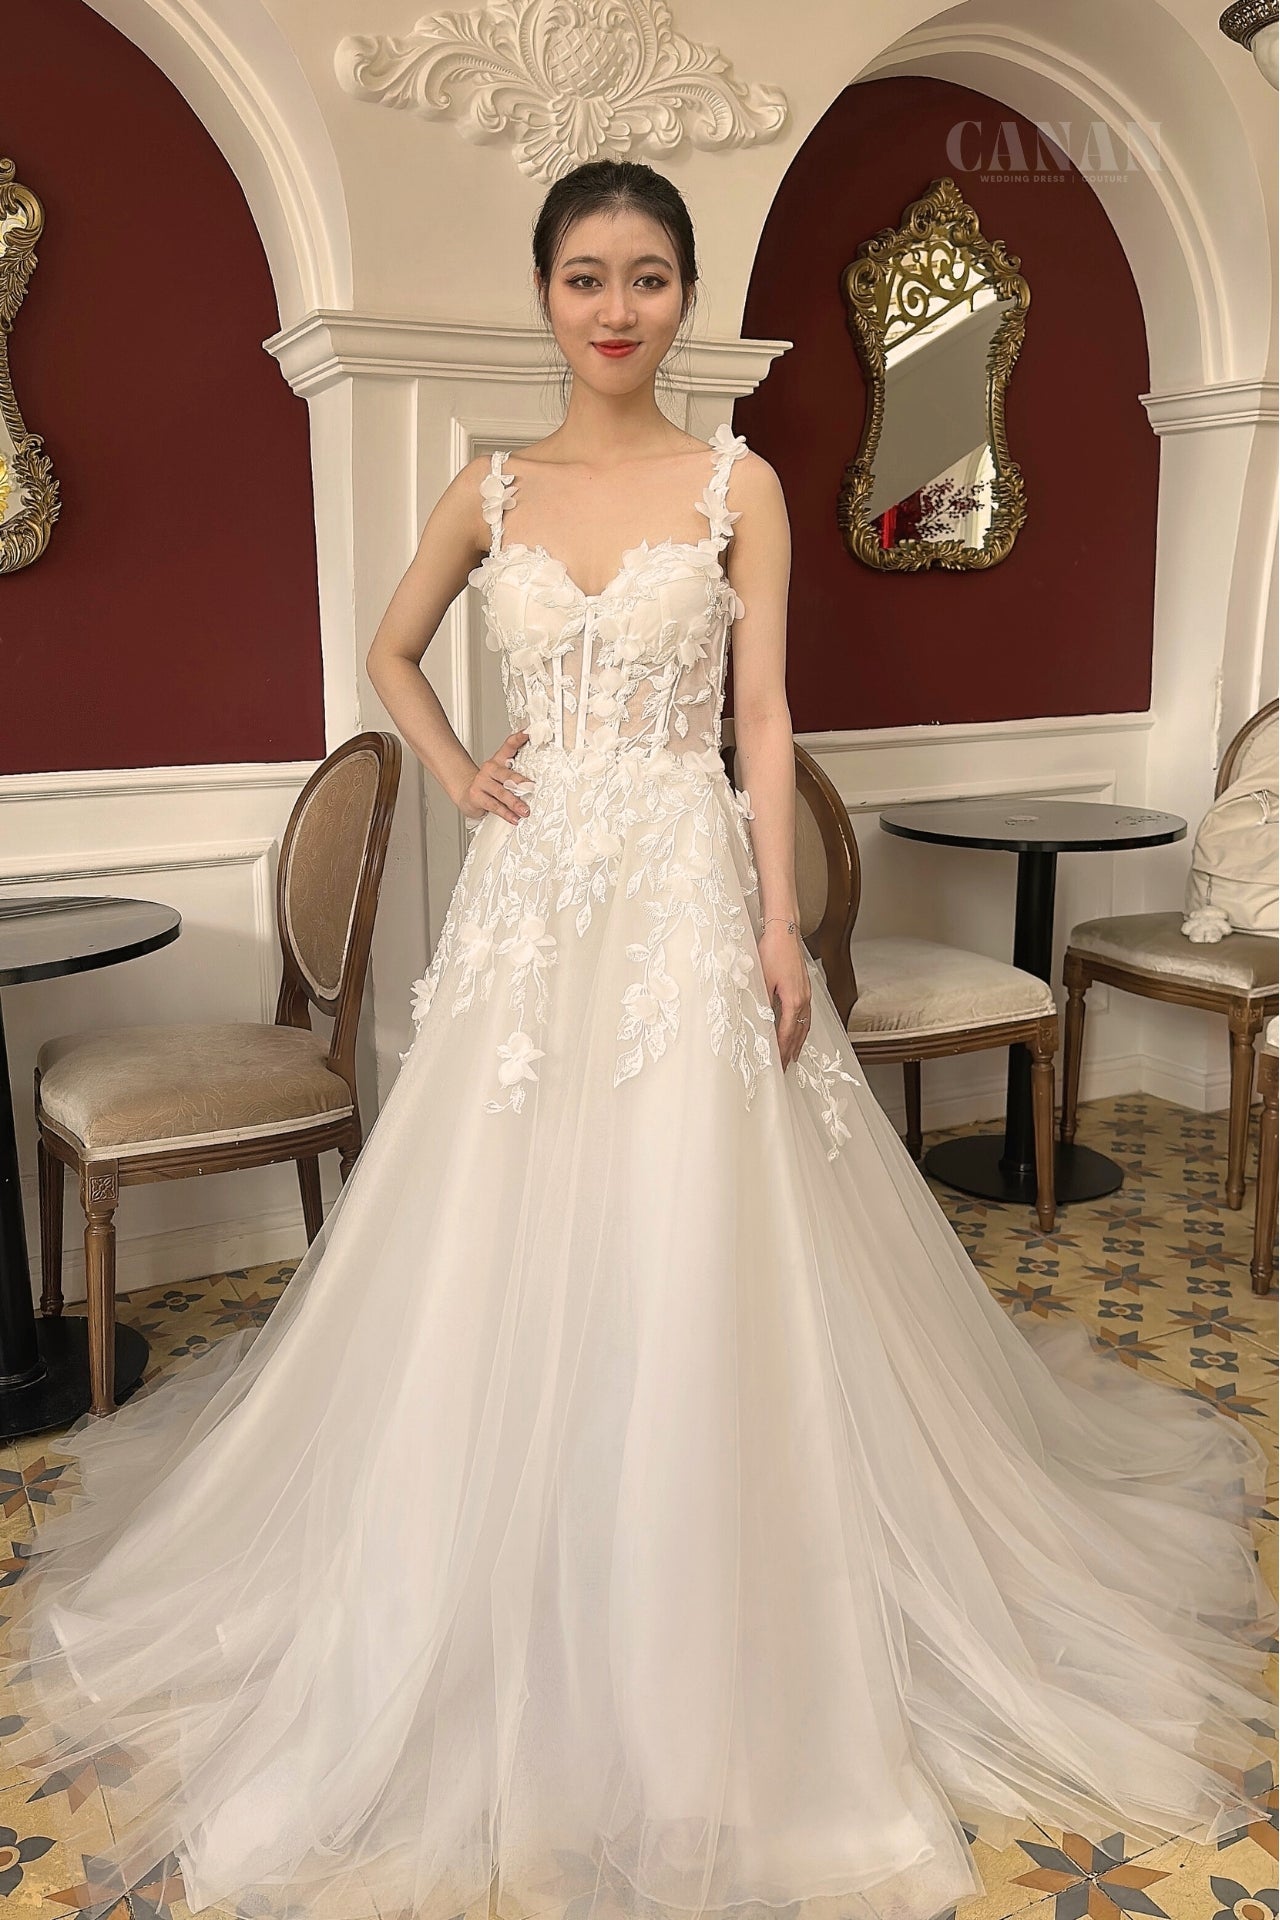 Jolie - Romantic Splendor: Corset A-Line Wedding Dress in Delicate Flower Lace and Tulle Fabric